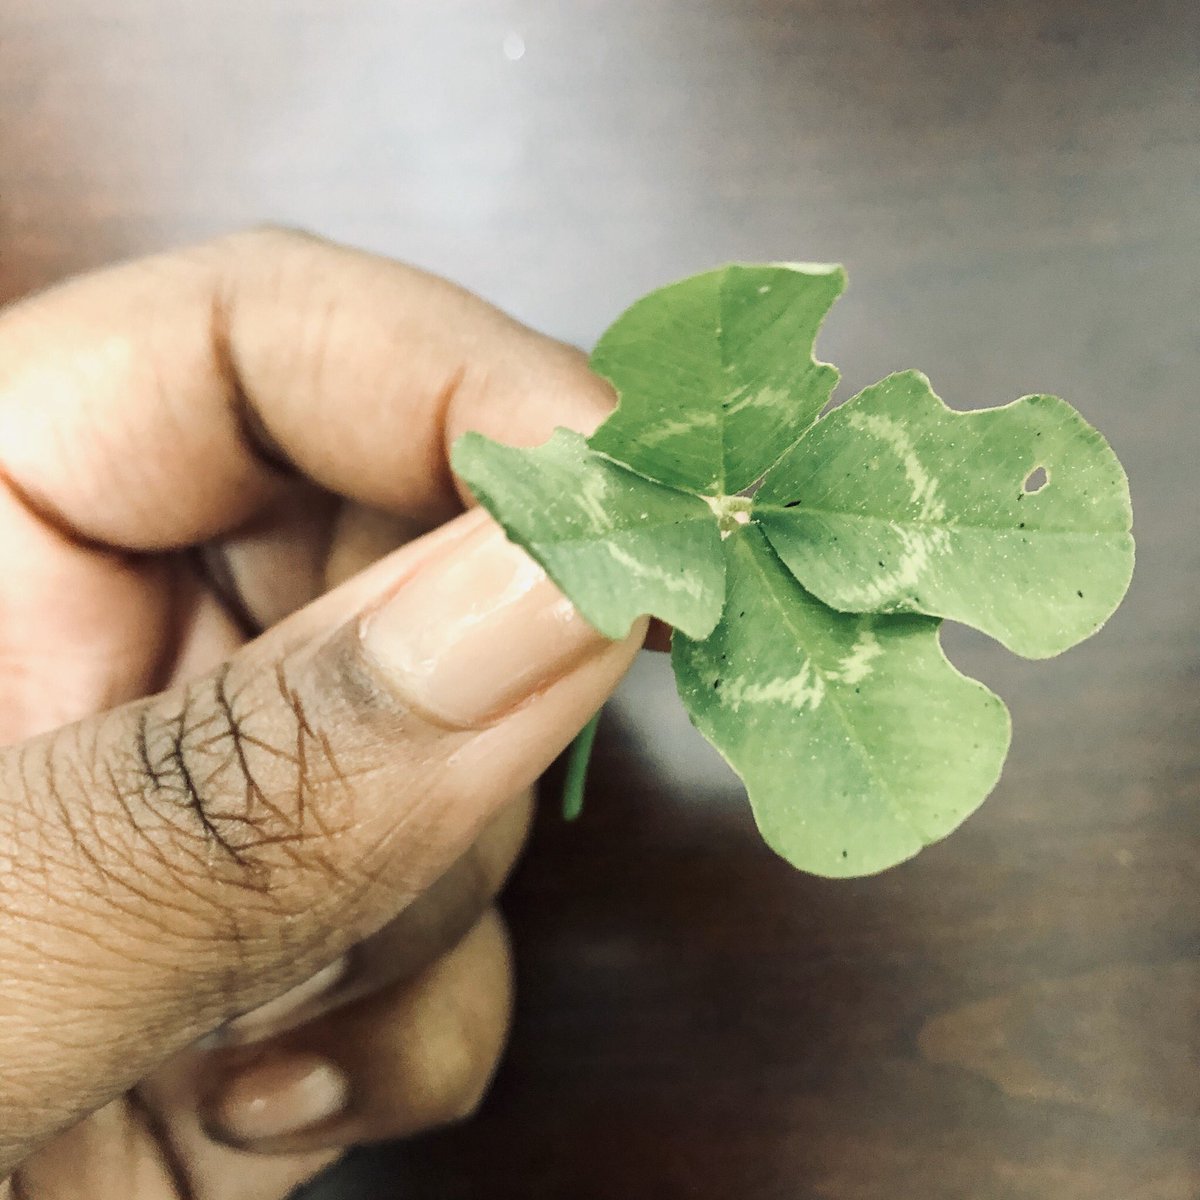 Went outside to catch my breath and found this four leaf clover. It’s not the normal shape; it’s special. I like it even more. I think this is a sign that everything will be okay.